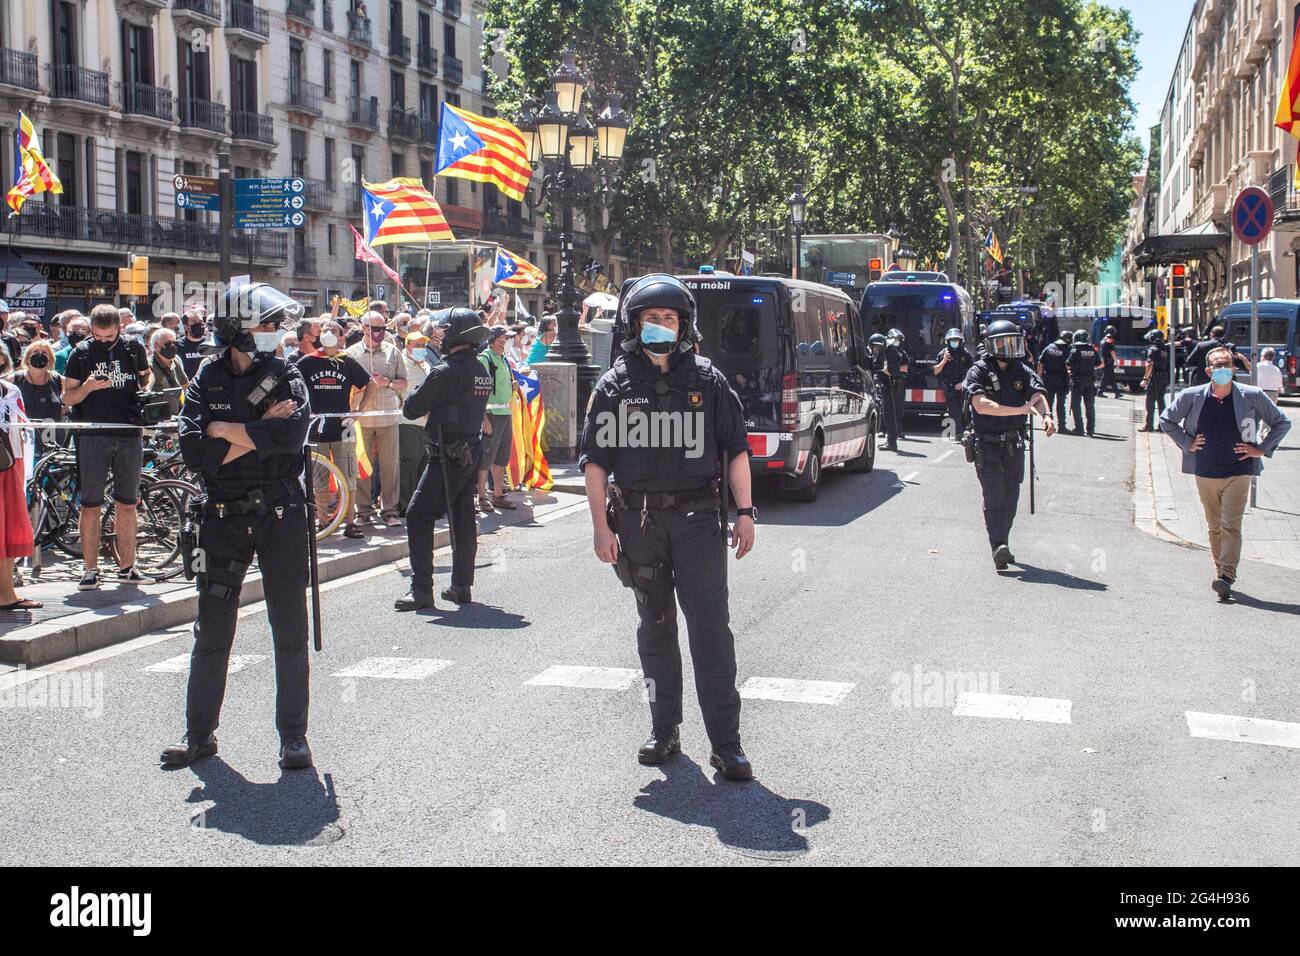 Protesters are seen with Catalan independence flags behind the police during the demonstration.Hundreds of Catalan independentistas have demonstrated in Las Ramblas in Barcelona, in front of the Gran Teatre del Liceu (Great Theater of the Lyceum), shielded by many policemen, to protest the visit of the President of the Spanish Government, Pedro Sanchez, who has held a conference entitled 'Reunion: a project for the future for all of Spain', with the expectation of an imminent granting of pardons for the independence leaders in prison. The protesters protested to denounce that the repression ag Stock Photo